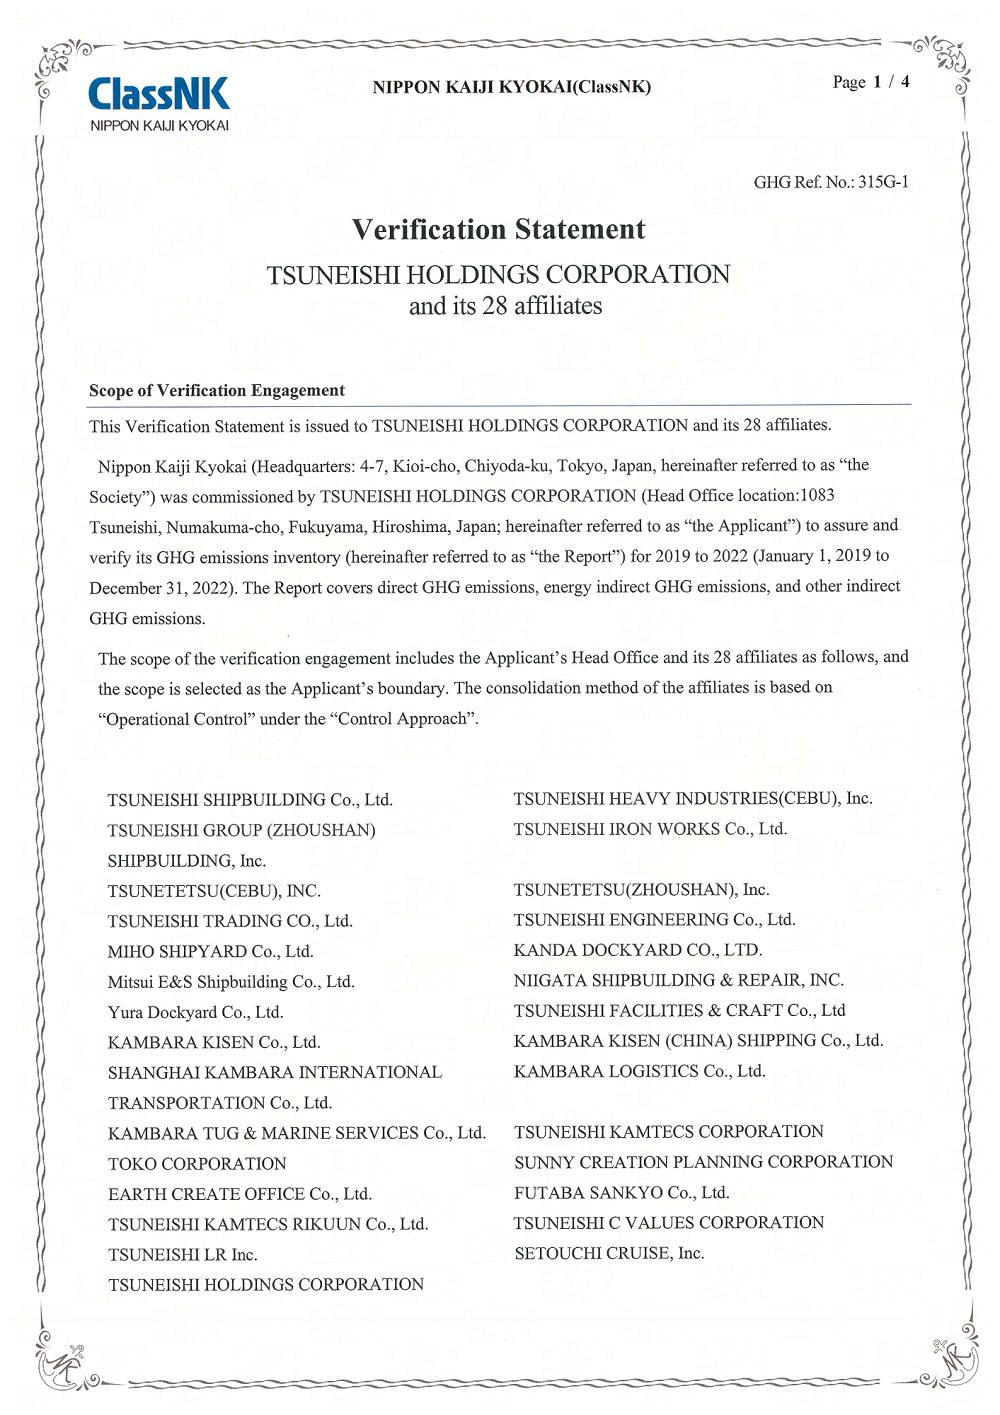 The TSUNEISHI GROUP Obtained third-party verification in accordance with ISO 14064